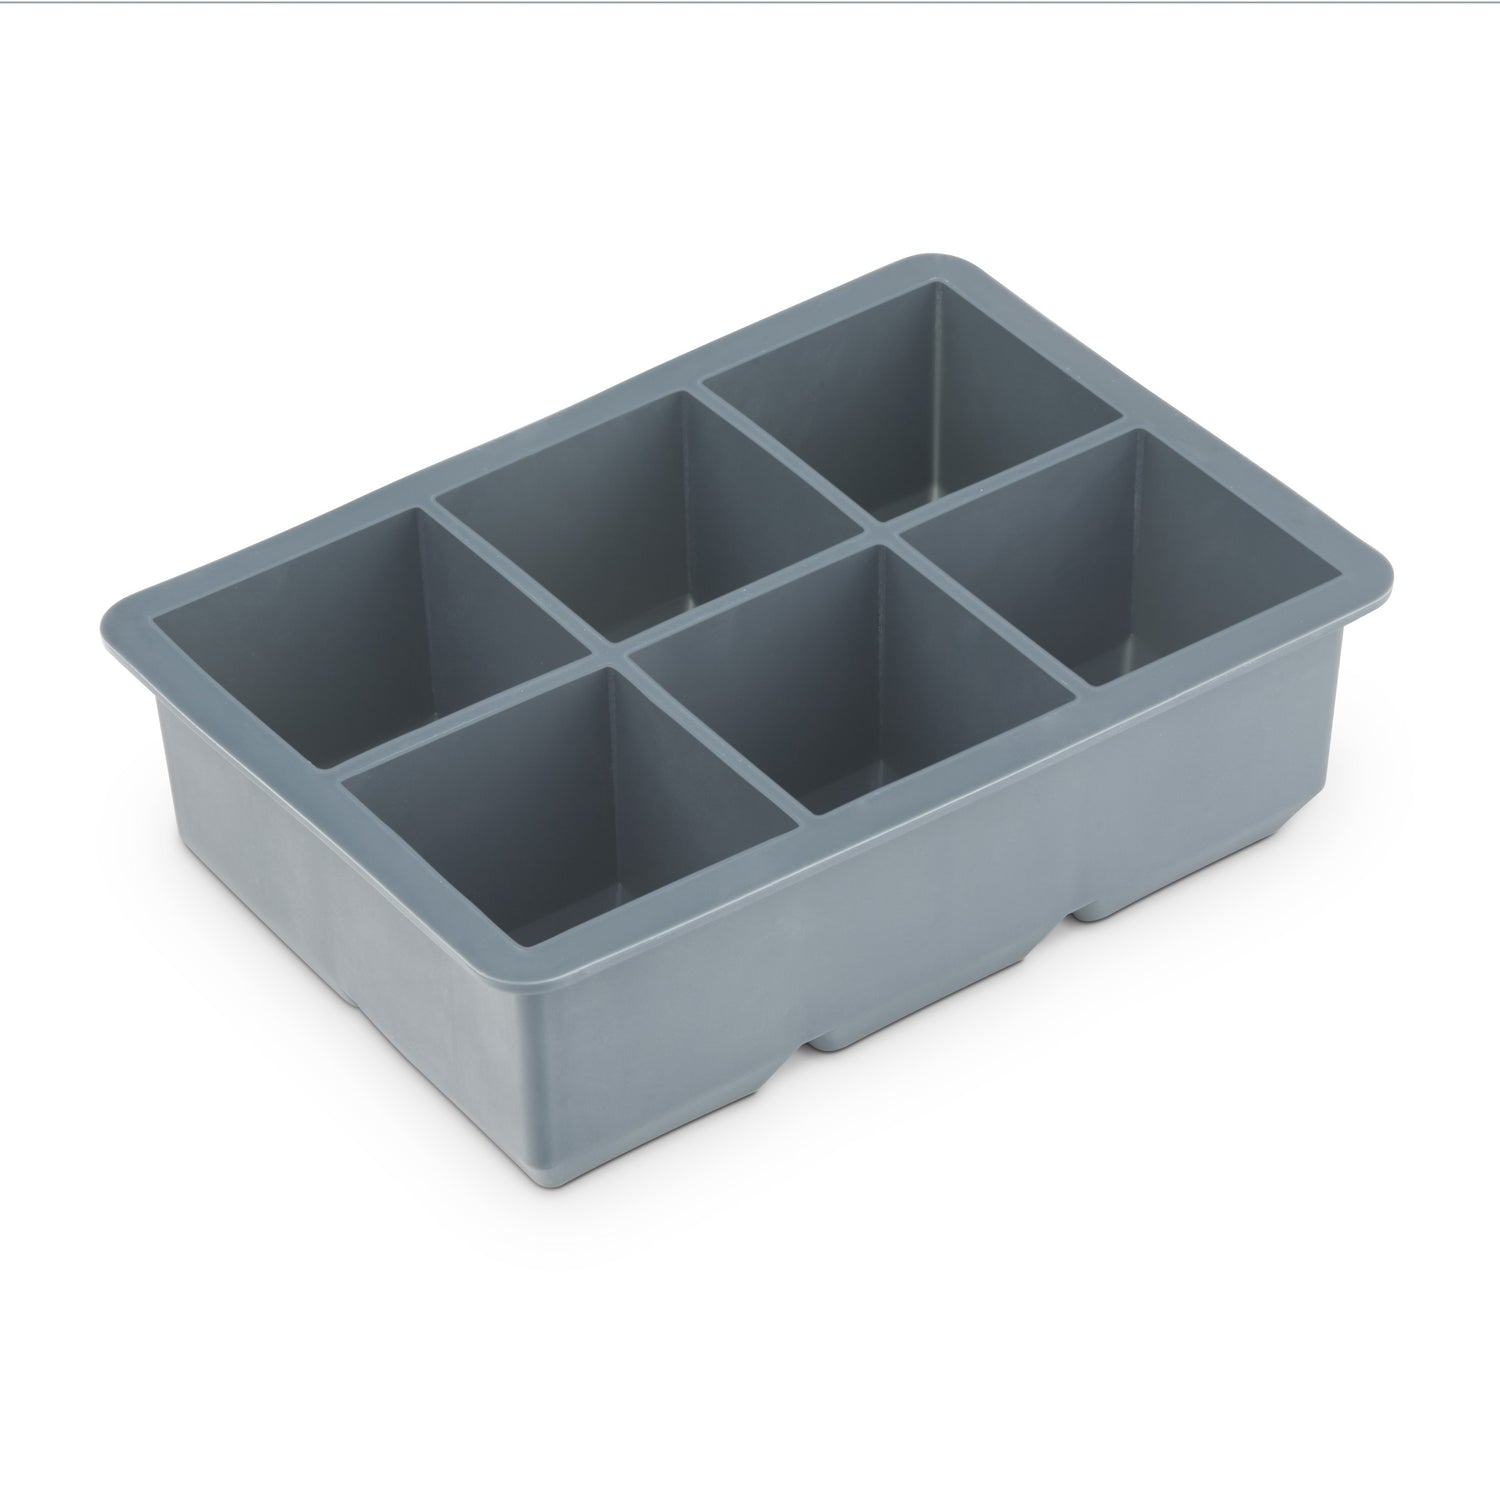 2" Extra-Large 6 Cube Ice Mould